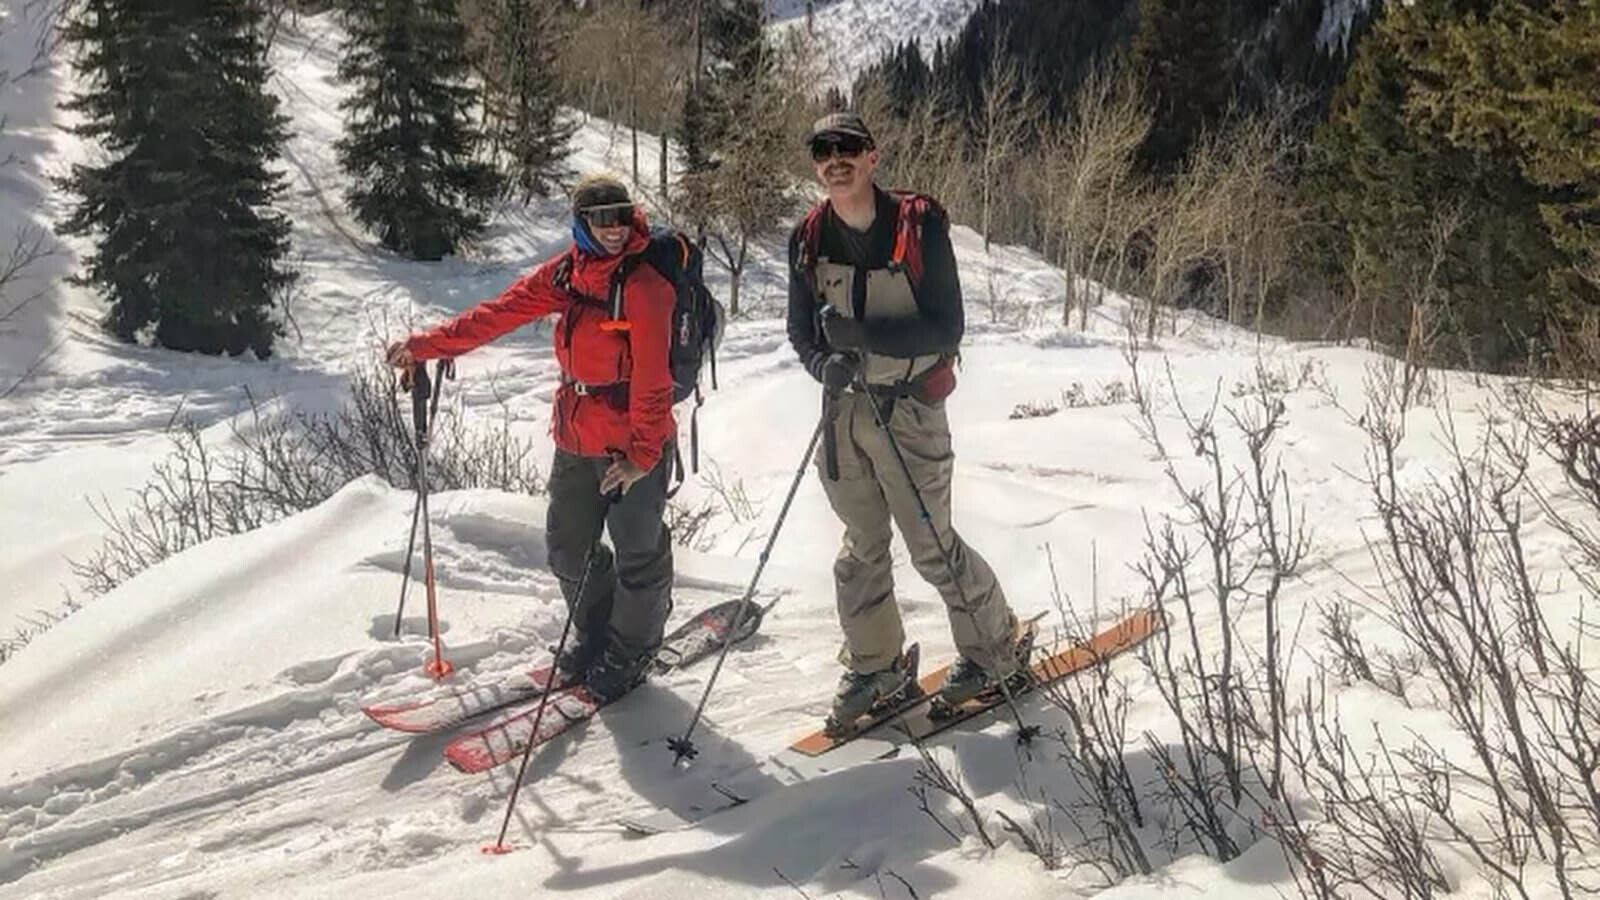 Travis Halverson admits he took too many risks the day he was caught in an avalanche in Teton County, Idaho.